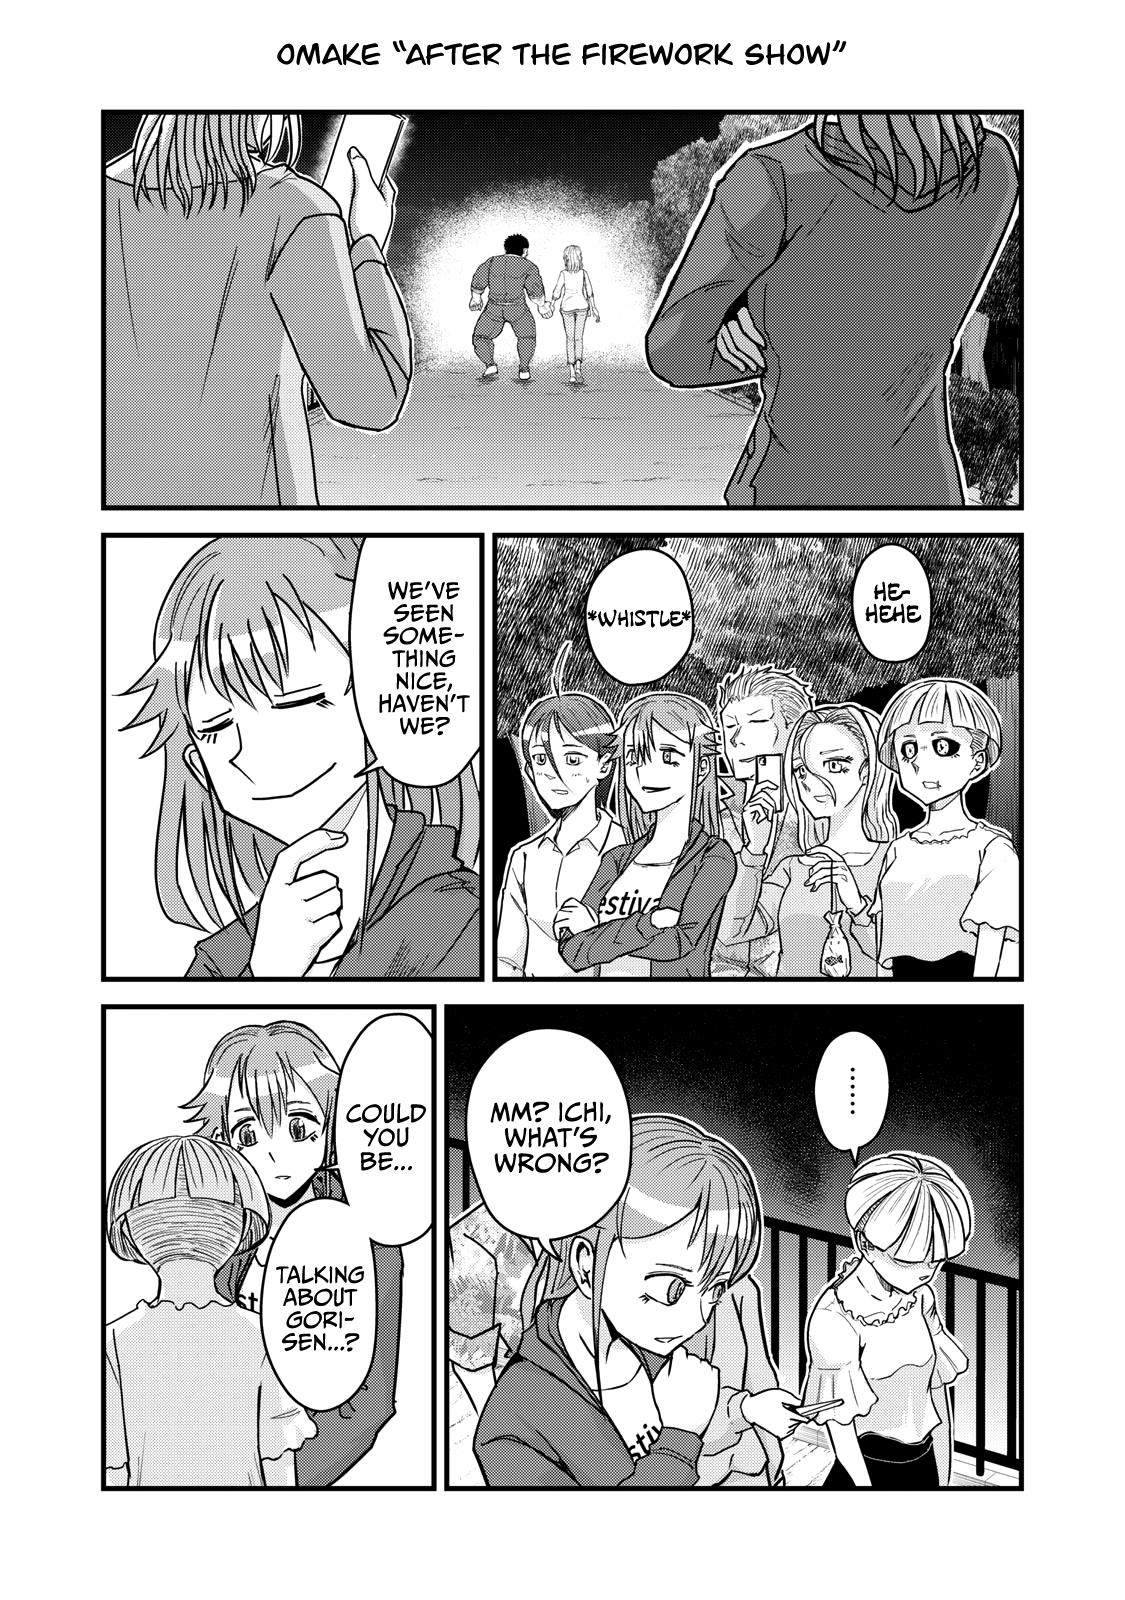 A Manga About The Kind Of Pe Teacher Who Dies At The Start Of A School Horror Movie - Page 1